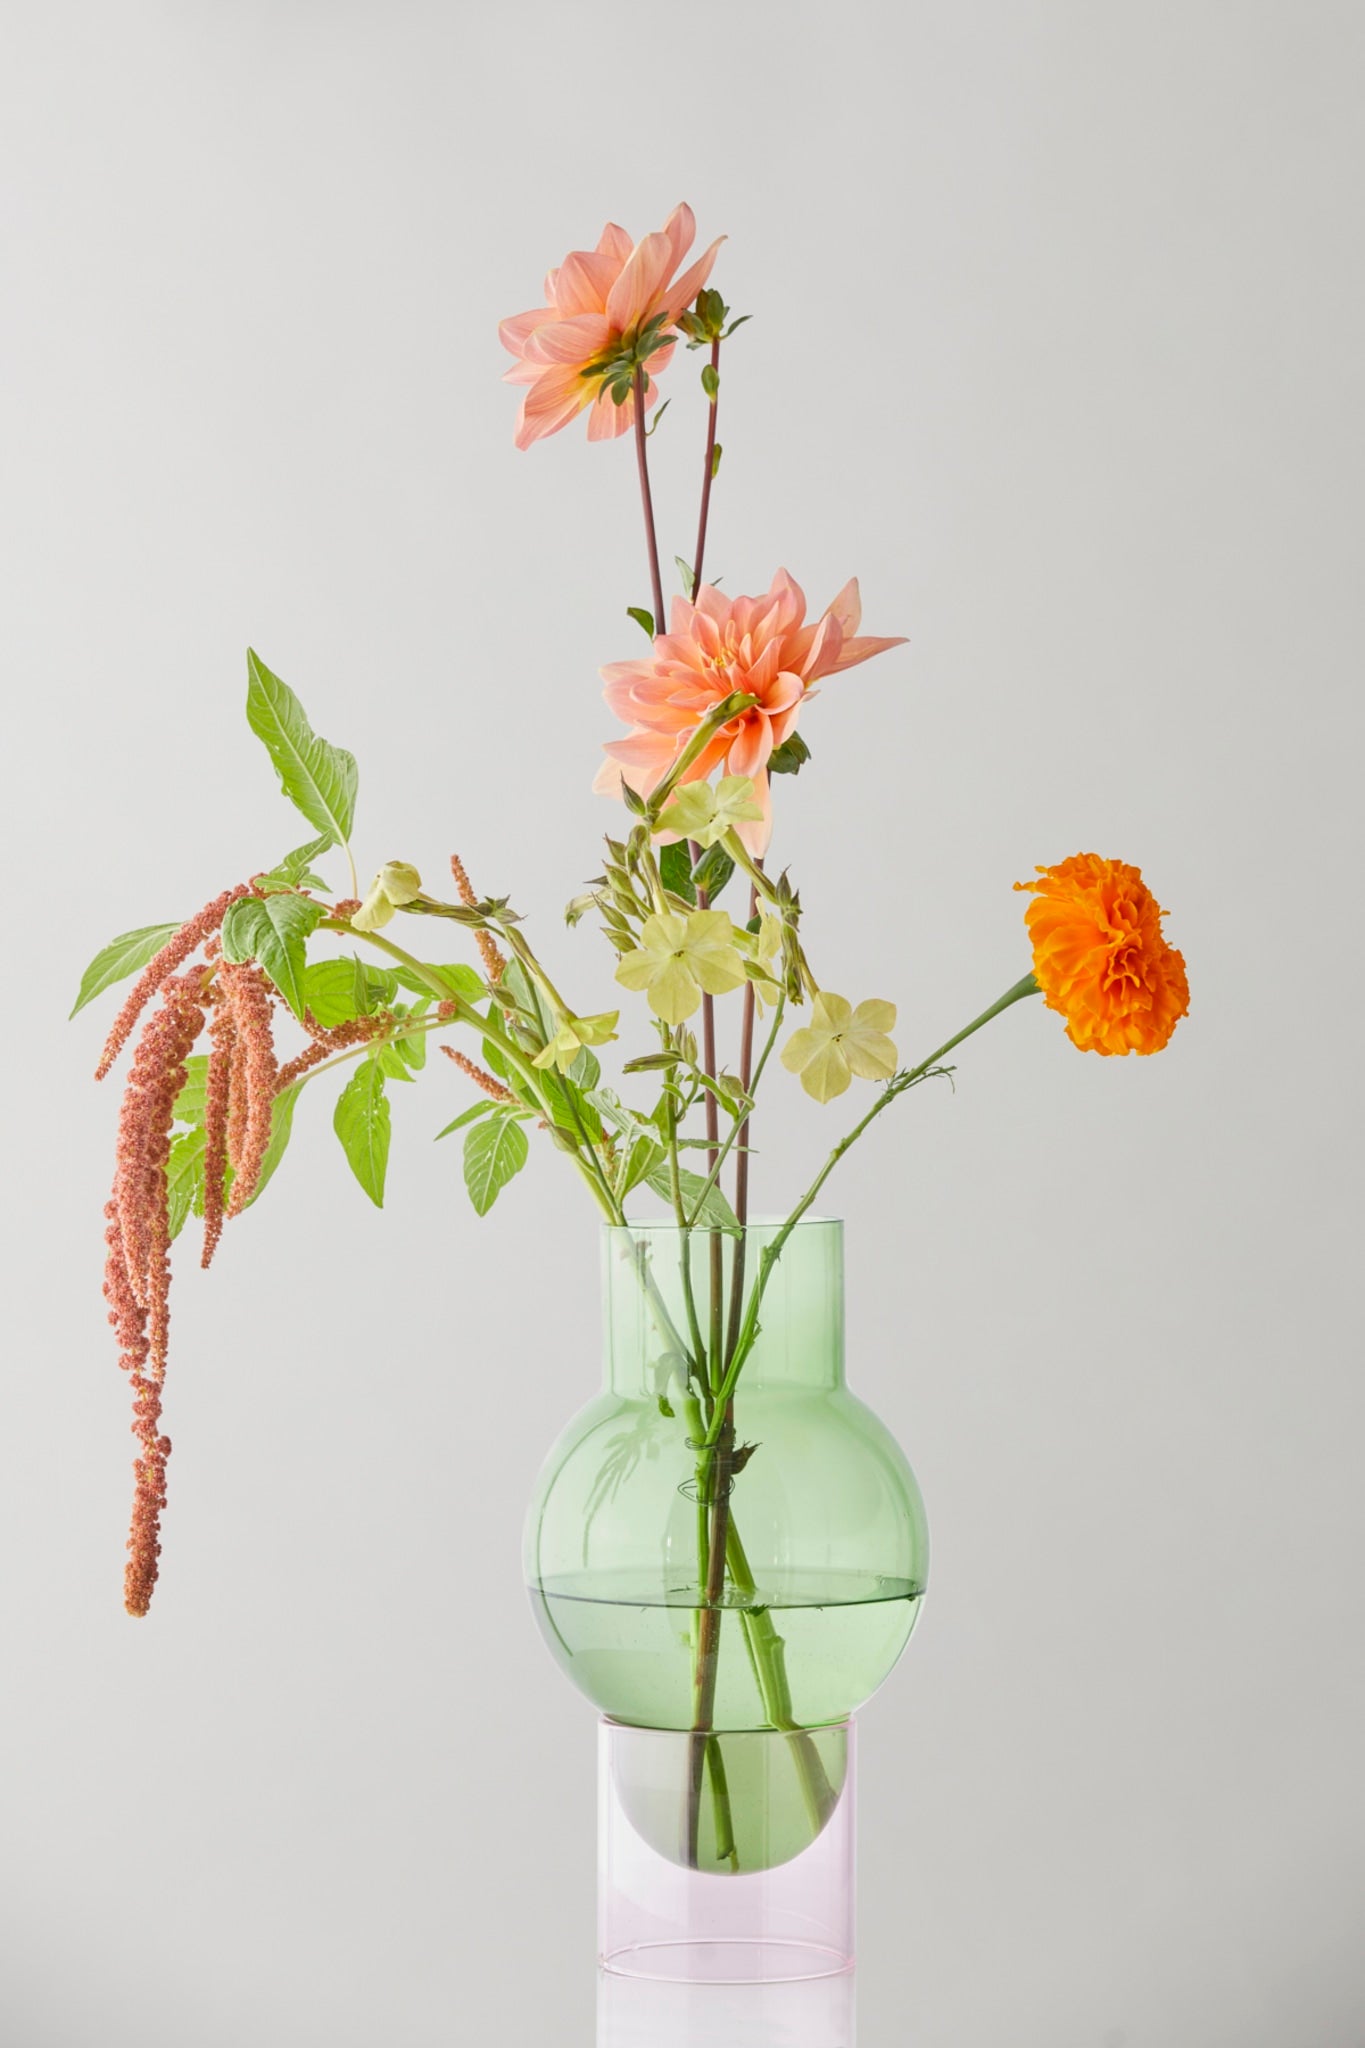 Pip Studio - A fresh flower a day keeps the doctor away. In a vase of  course. #pipstudio #vase #flowers